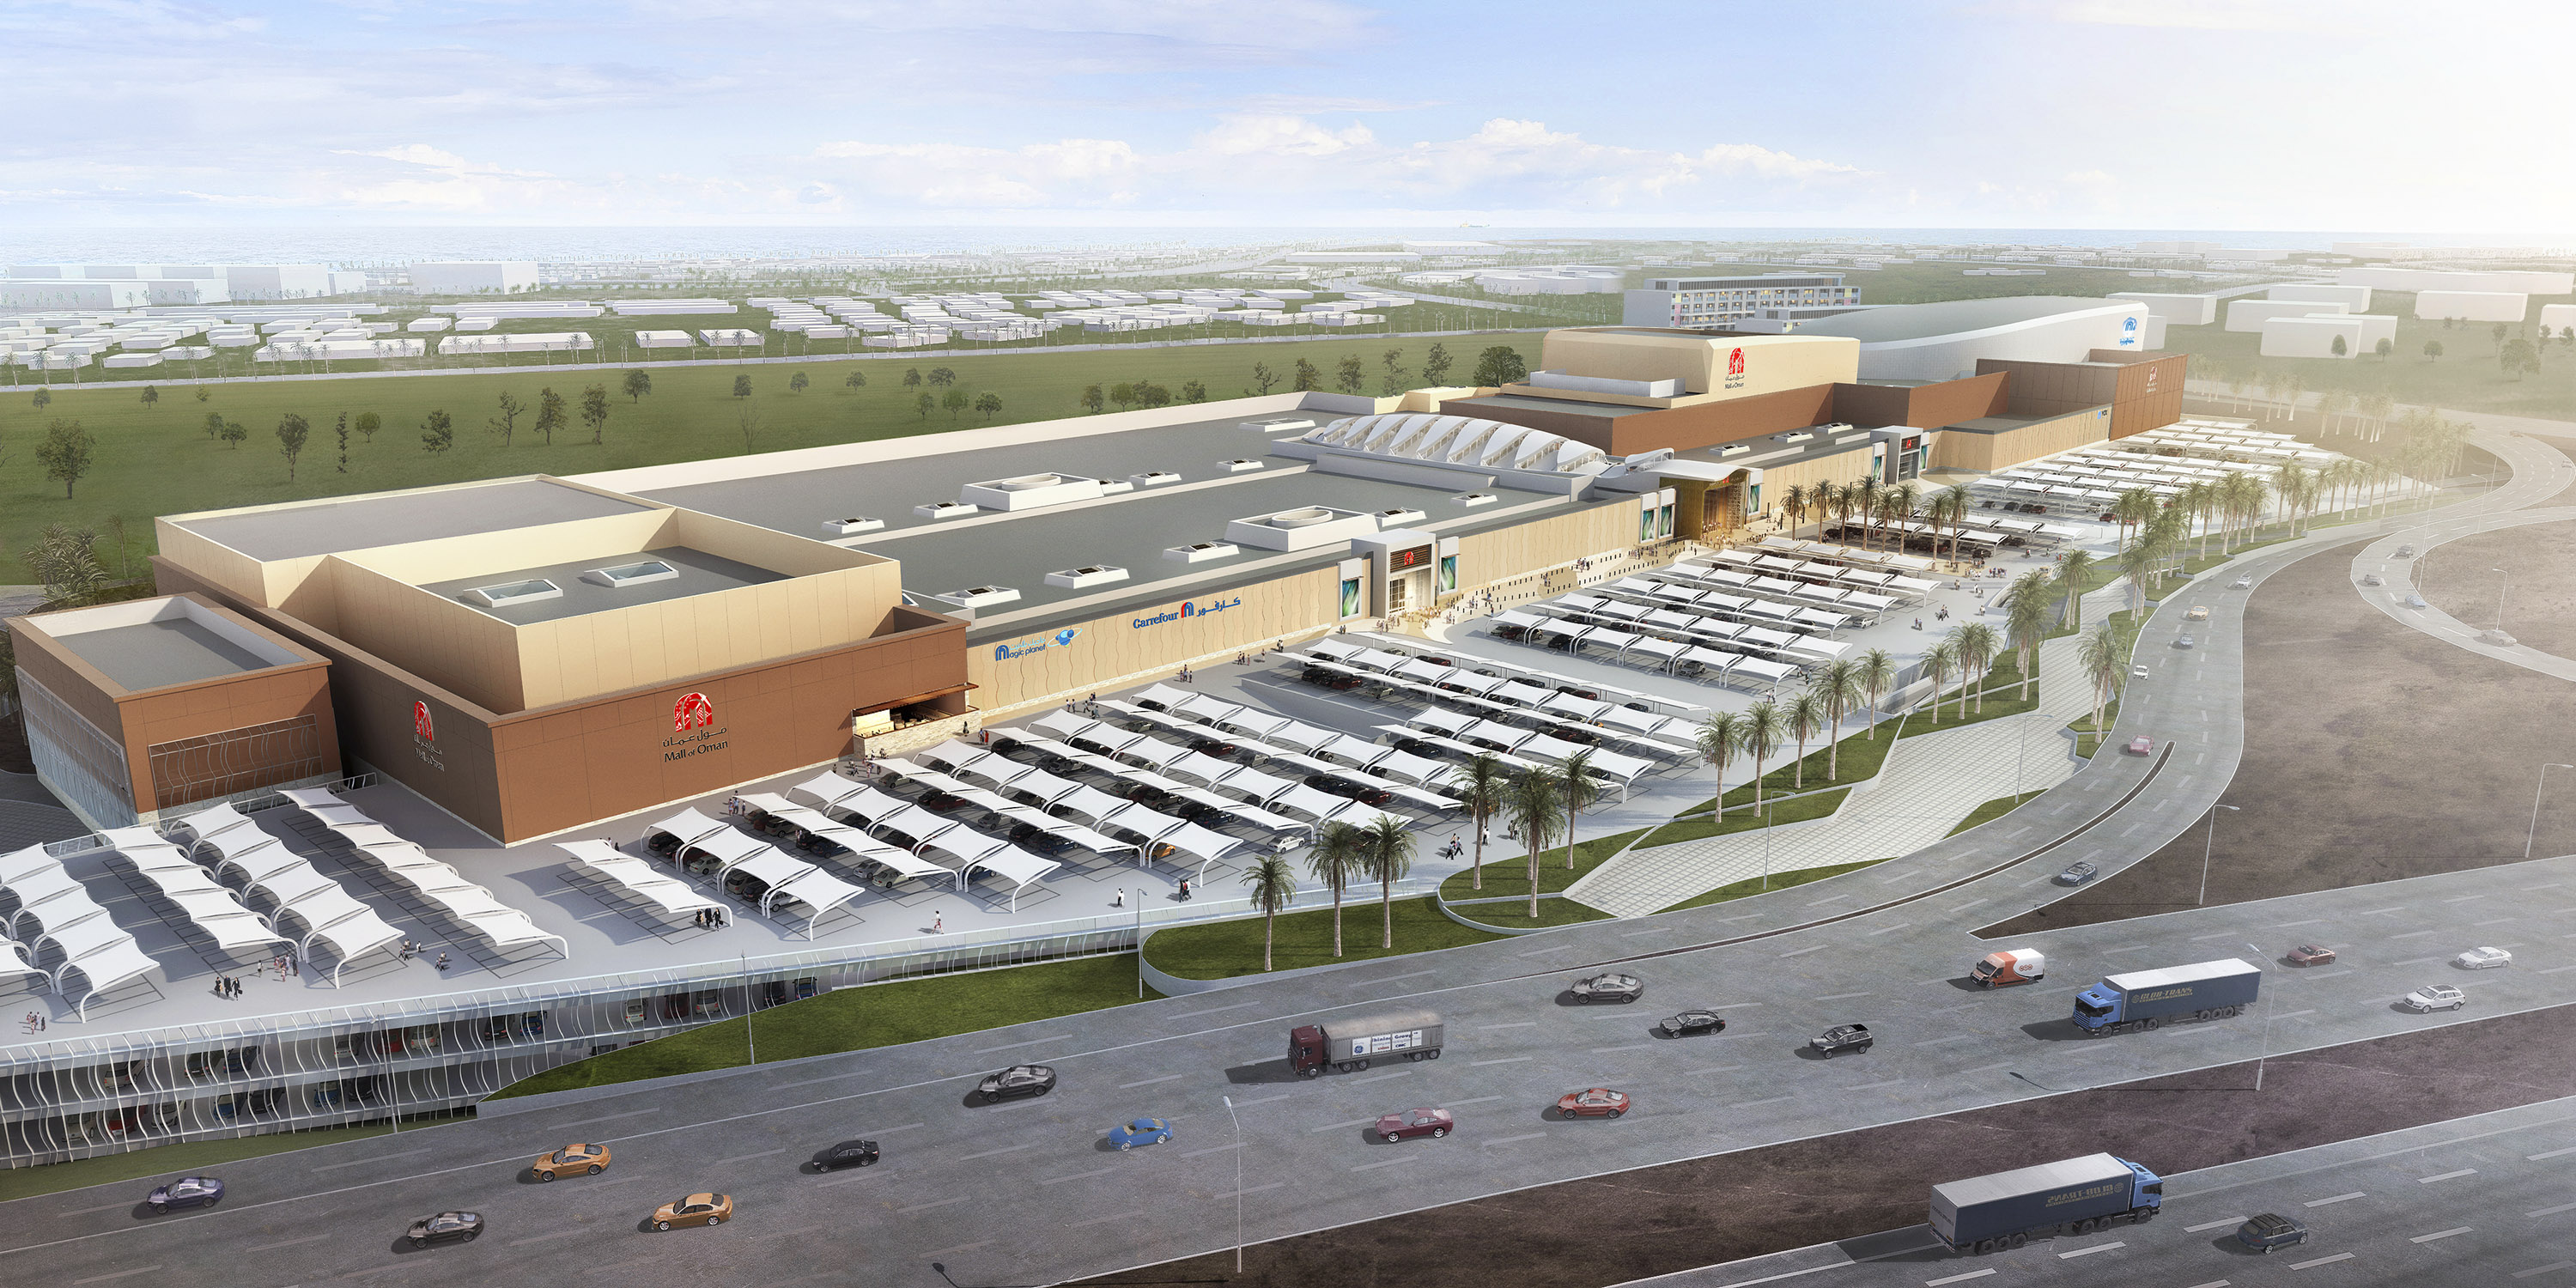 Huge snow park, 350 shops to form part of OMR275 million Mall of Oman